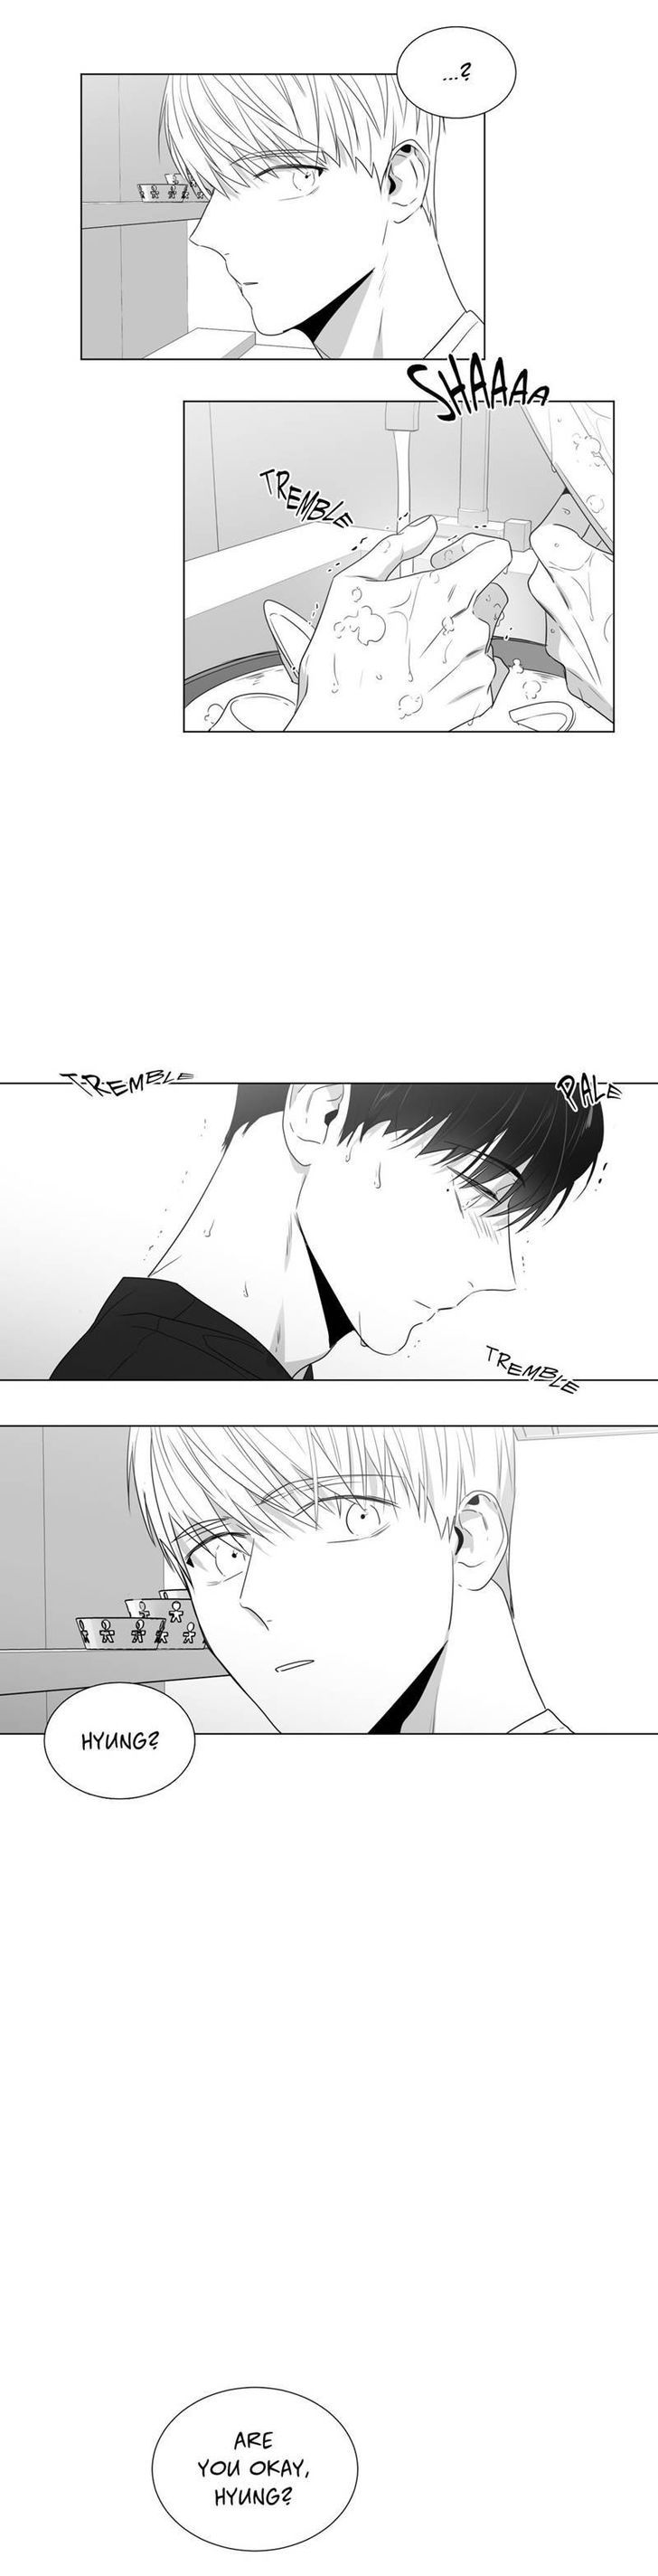 Lover Boy (Lezhin) Chapter 041 page 15